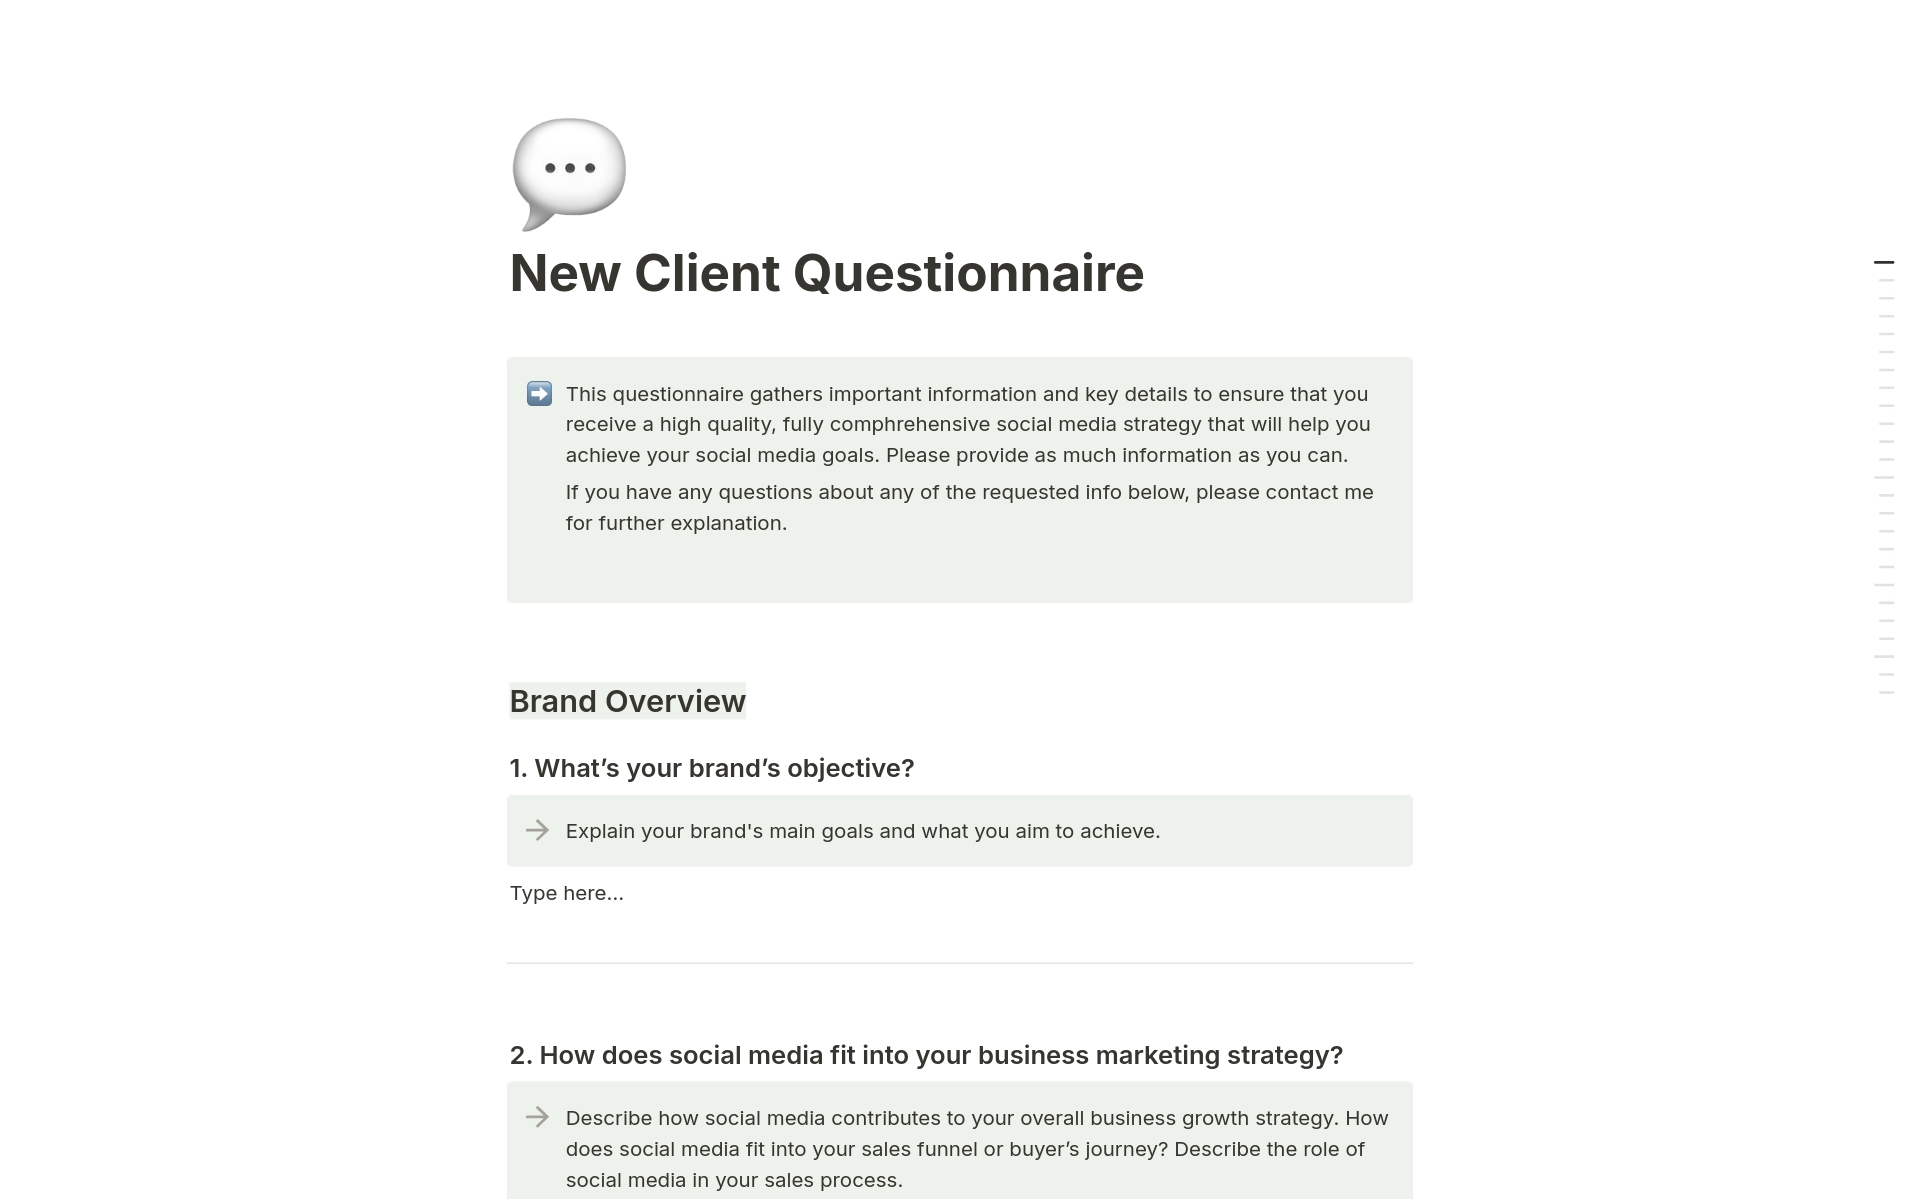 Streamline your client onboarding process with our comprehensive Client Questionnaire Template. Perfect for social media managers, digital freelancers and creators, this template helps you gather all the essential information to understand your client's needs and goals.